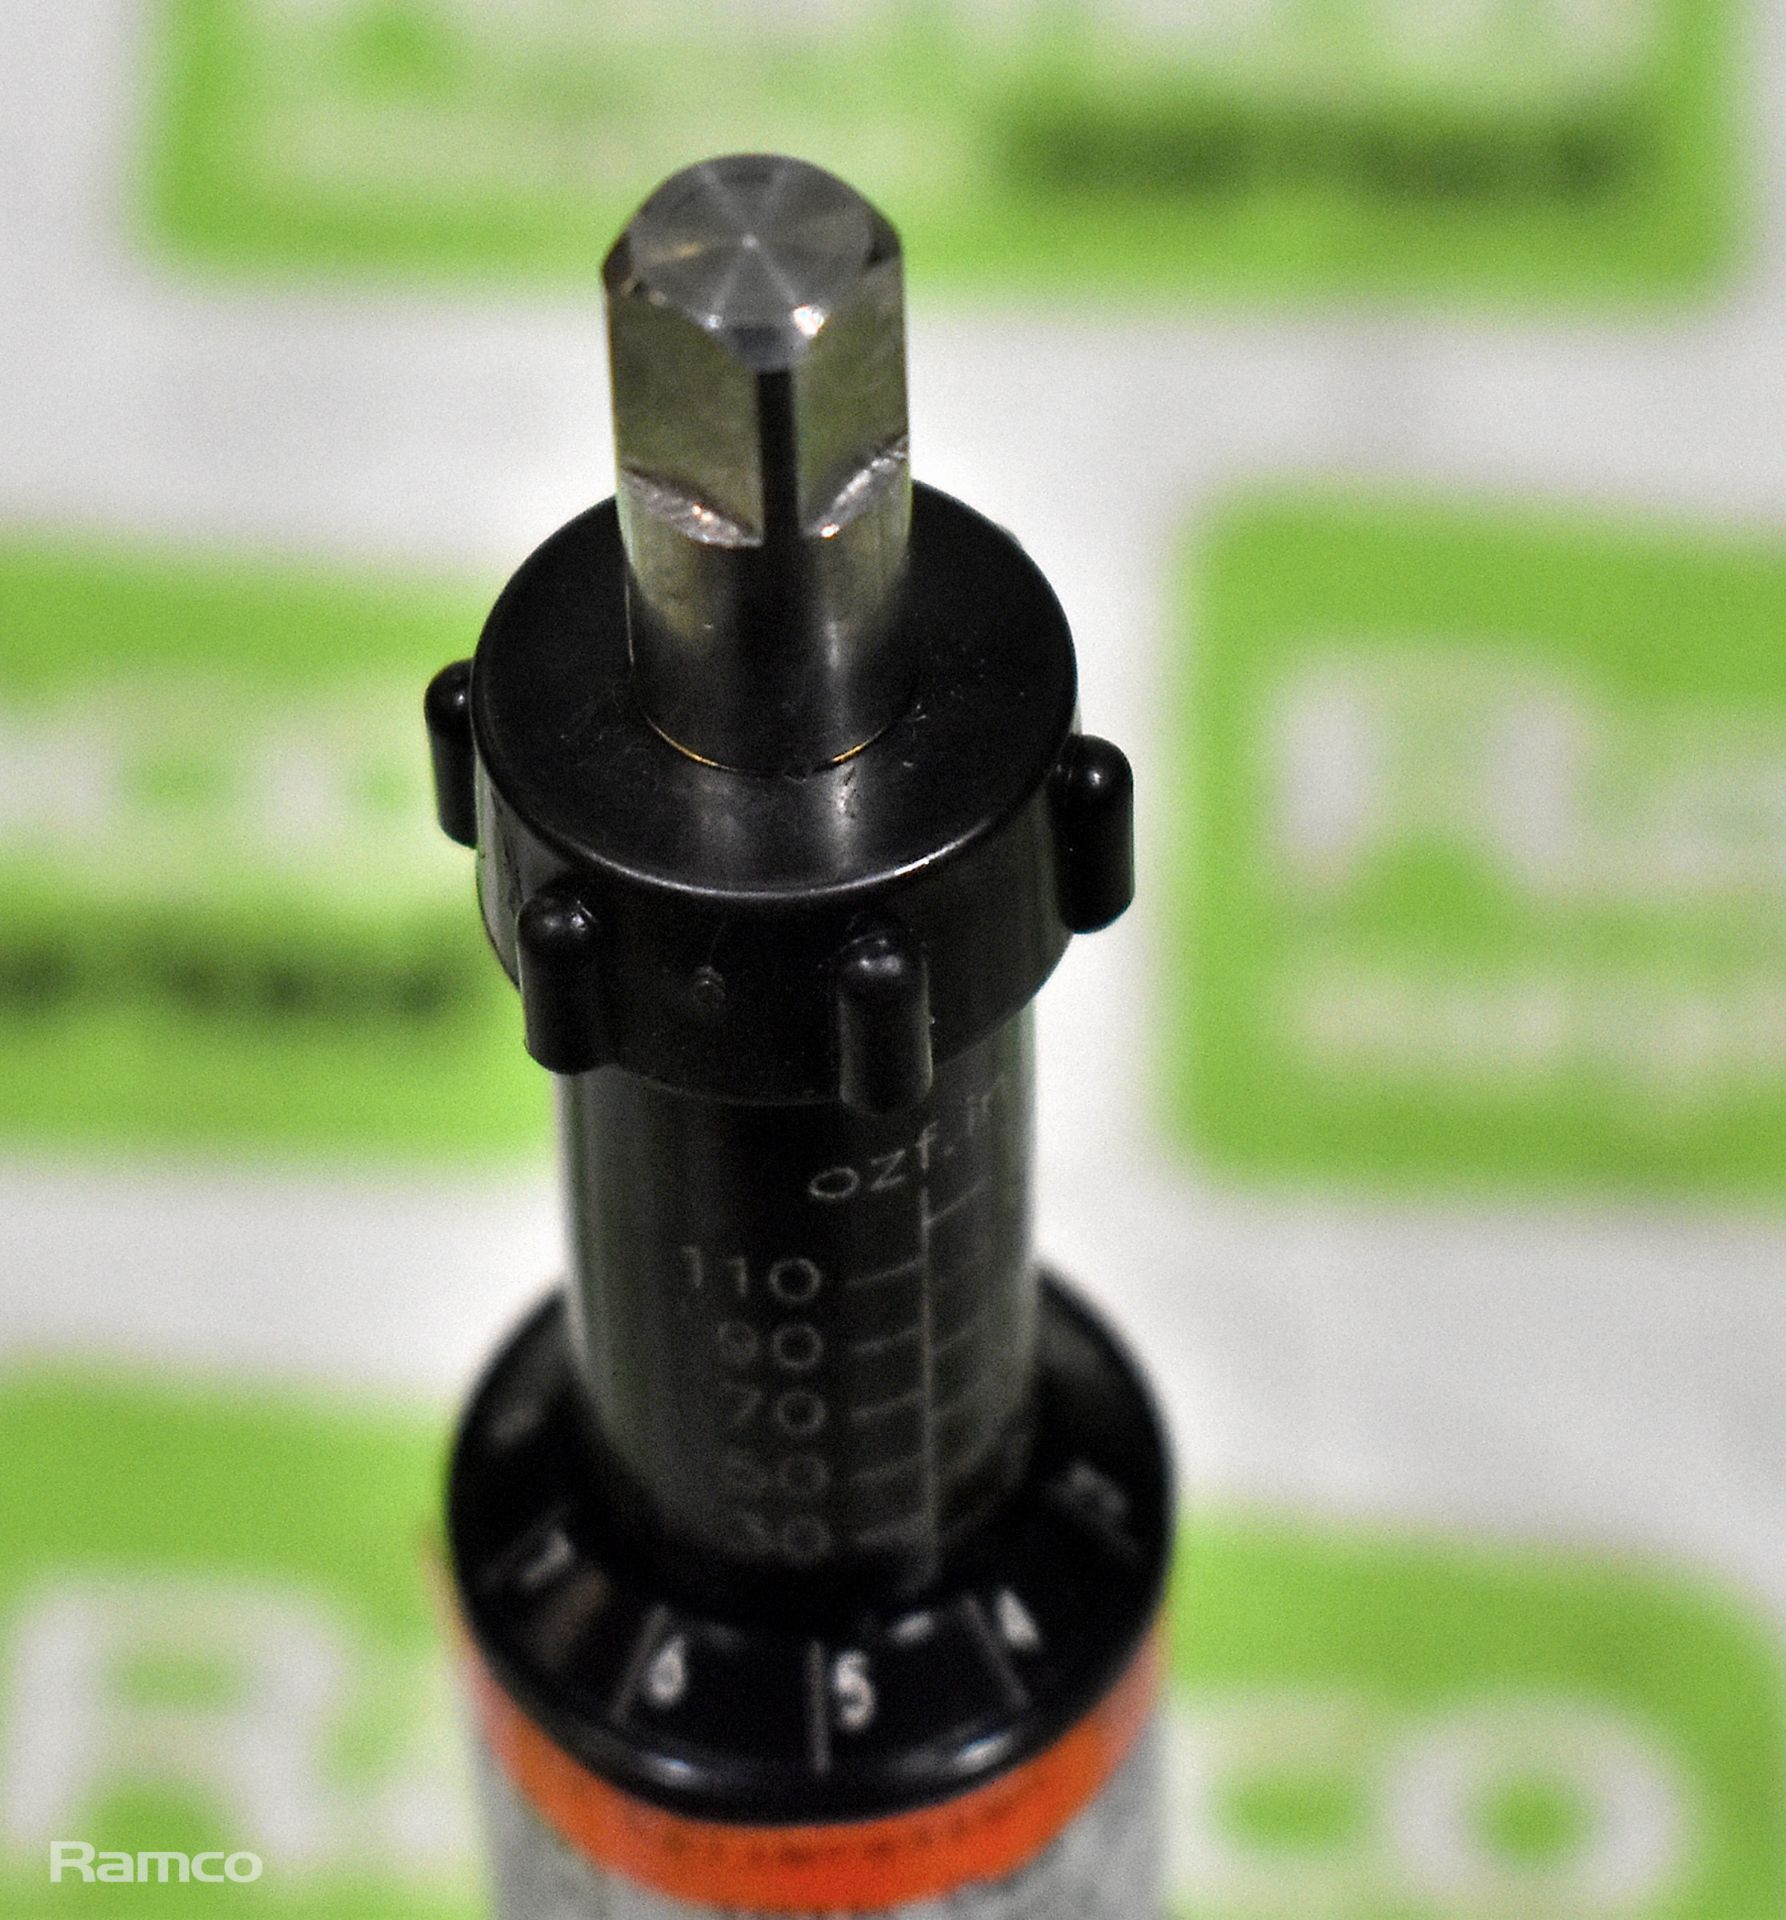 Torque screwdriver 1/4 inch 20-120 ozf.inch - Image 3 of 3